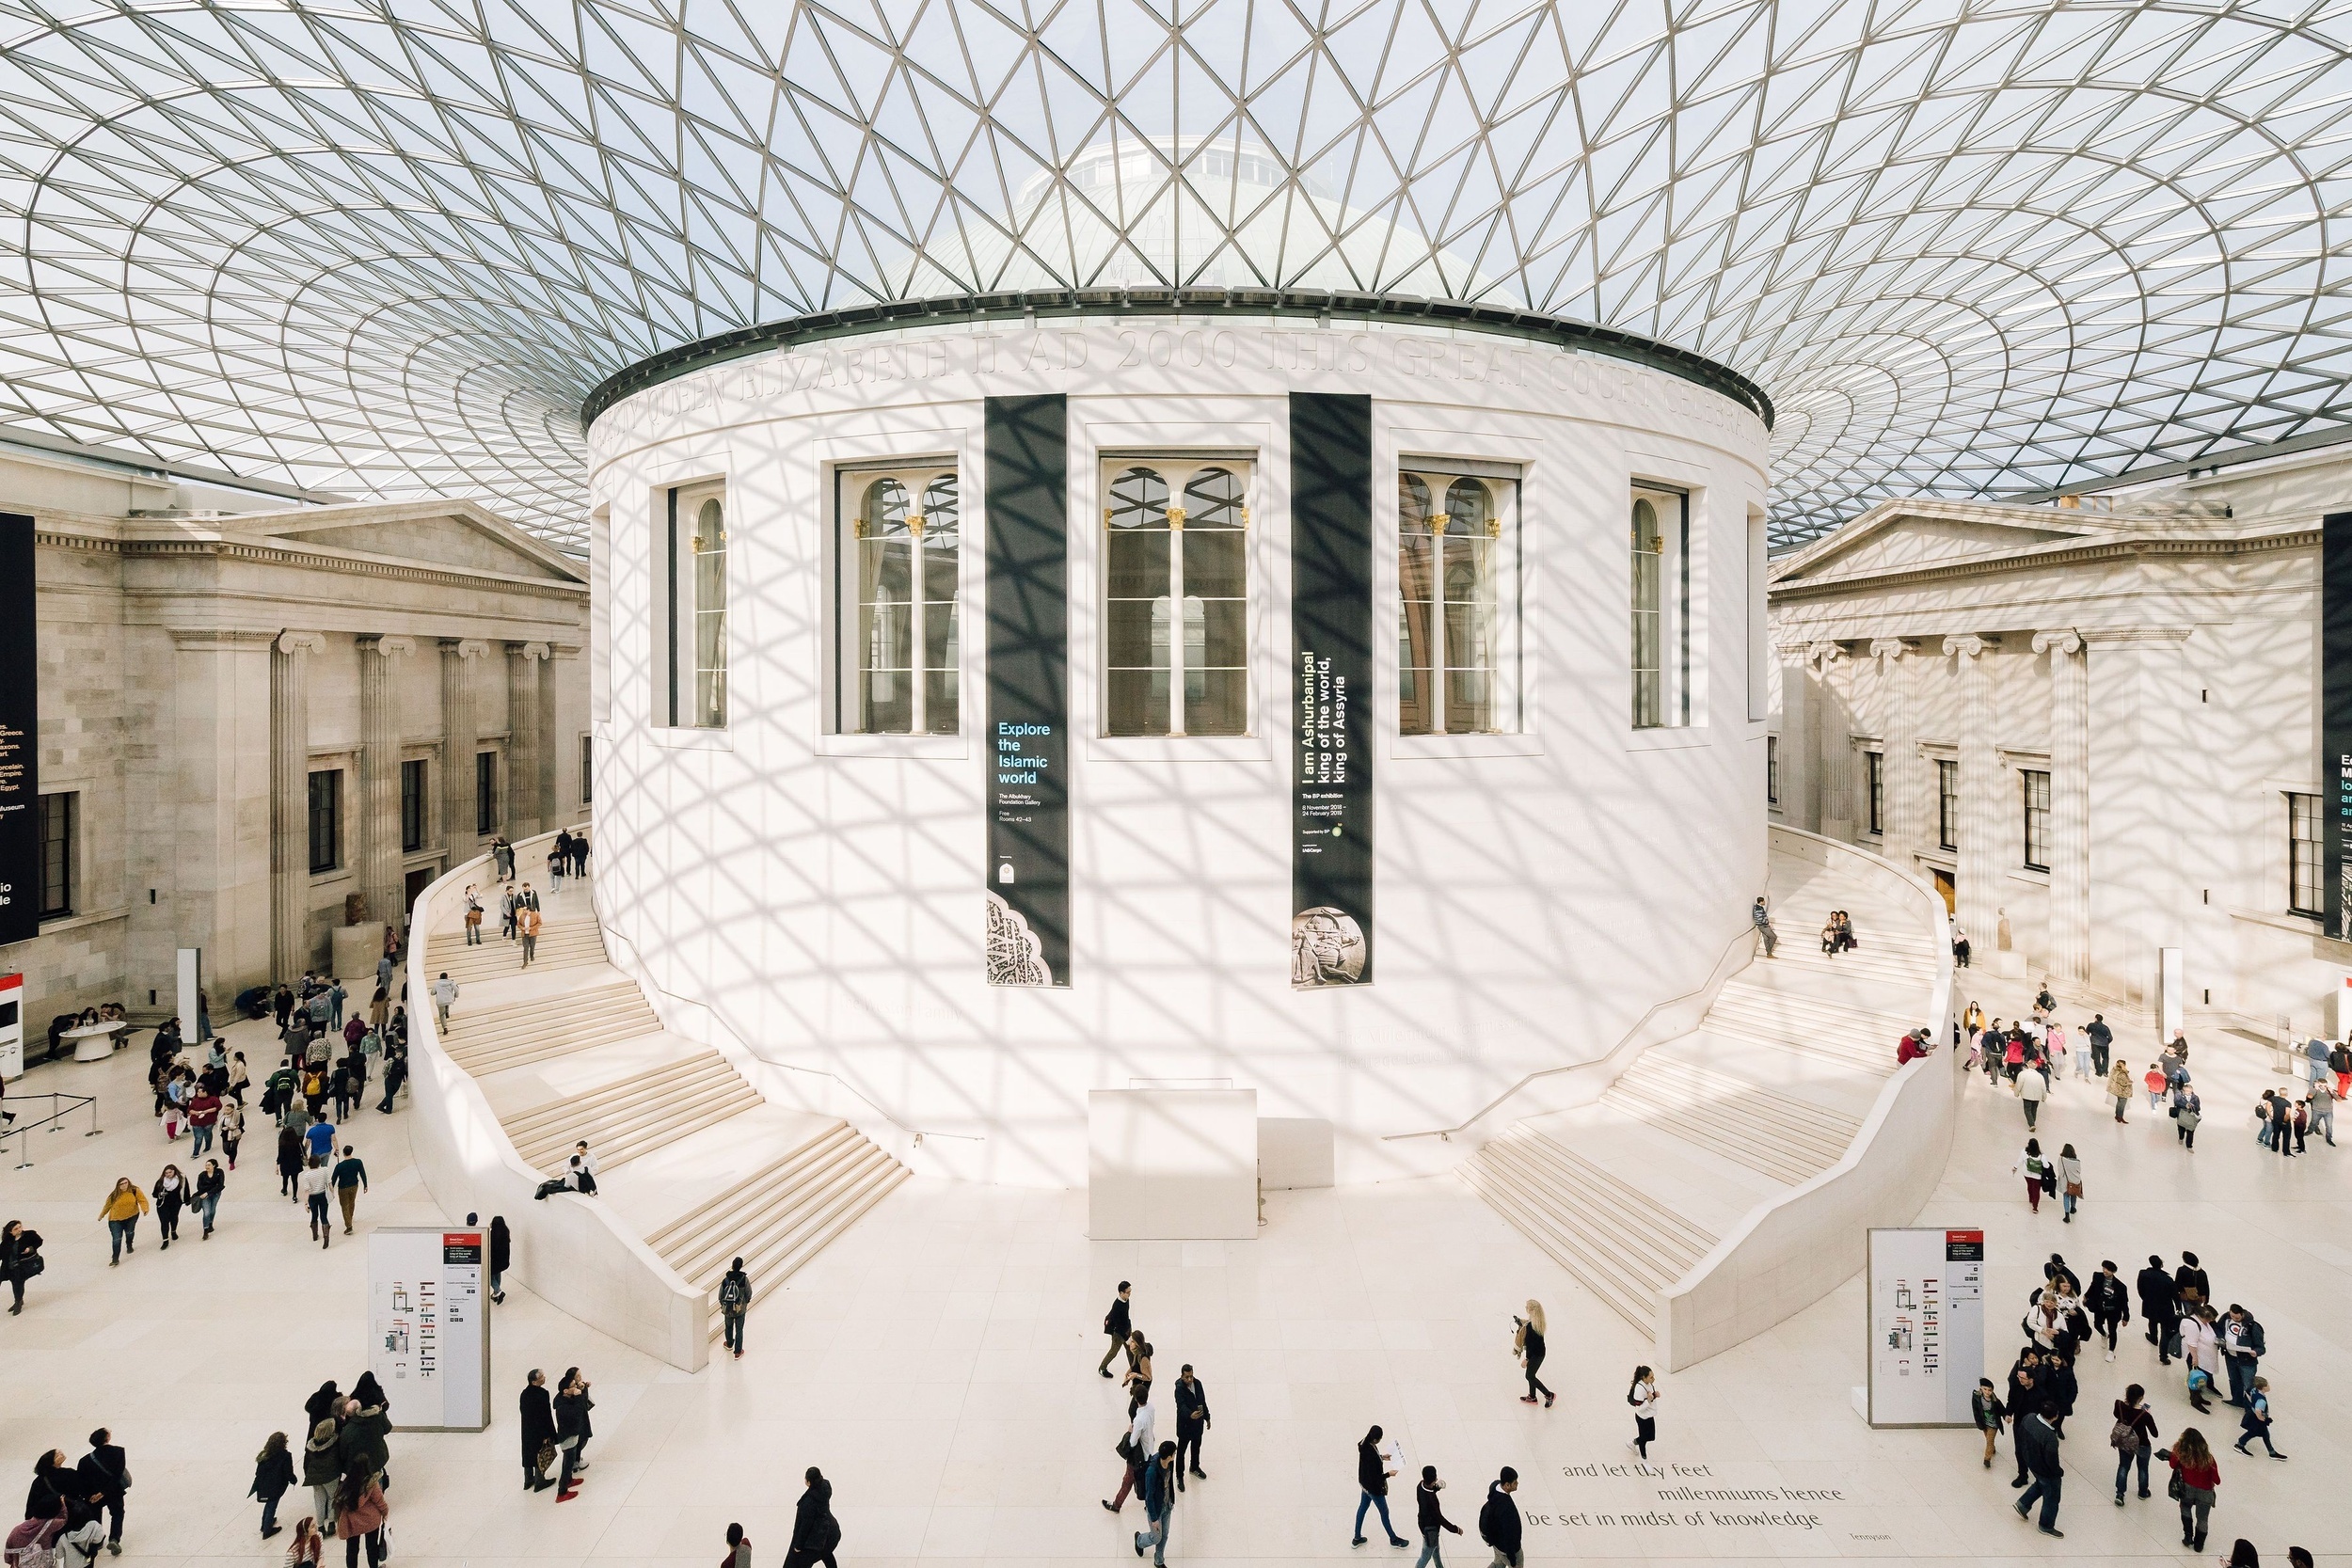 <p>From the Rosetta Stone to the Egyptian mummy, there's always a good reason to visit the British Museum. There's a grand entrance, too, which opens up to a skylight that looks more like a spaceship than it does a lobby. Come for the artifacts; stay for the blast-off. </p><p>You may also like: <a href='https://www.yardbarker.com/lifestyle/articles/21_chocolate_chip_recipes_to_satiate_your_sweet_tooth_122723/s1__37515900'>21 chocolate chip recipes to satiate your sweet tooth</a></p>